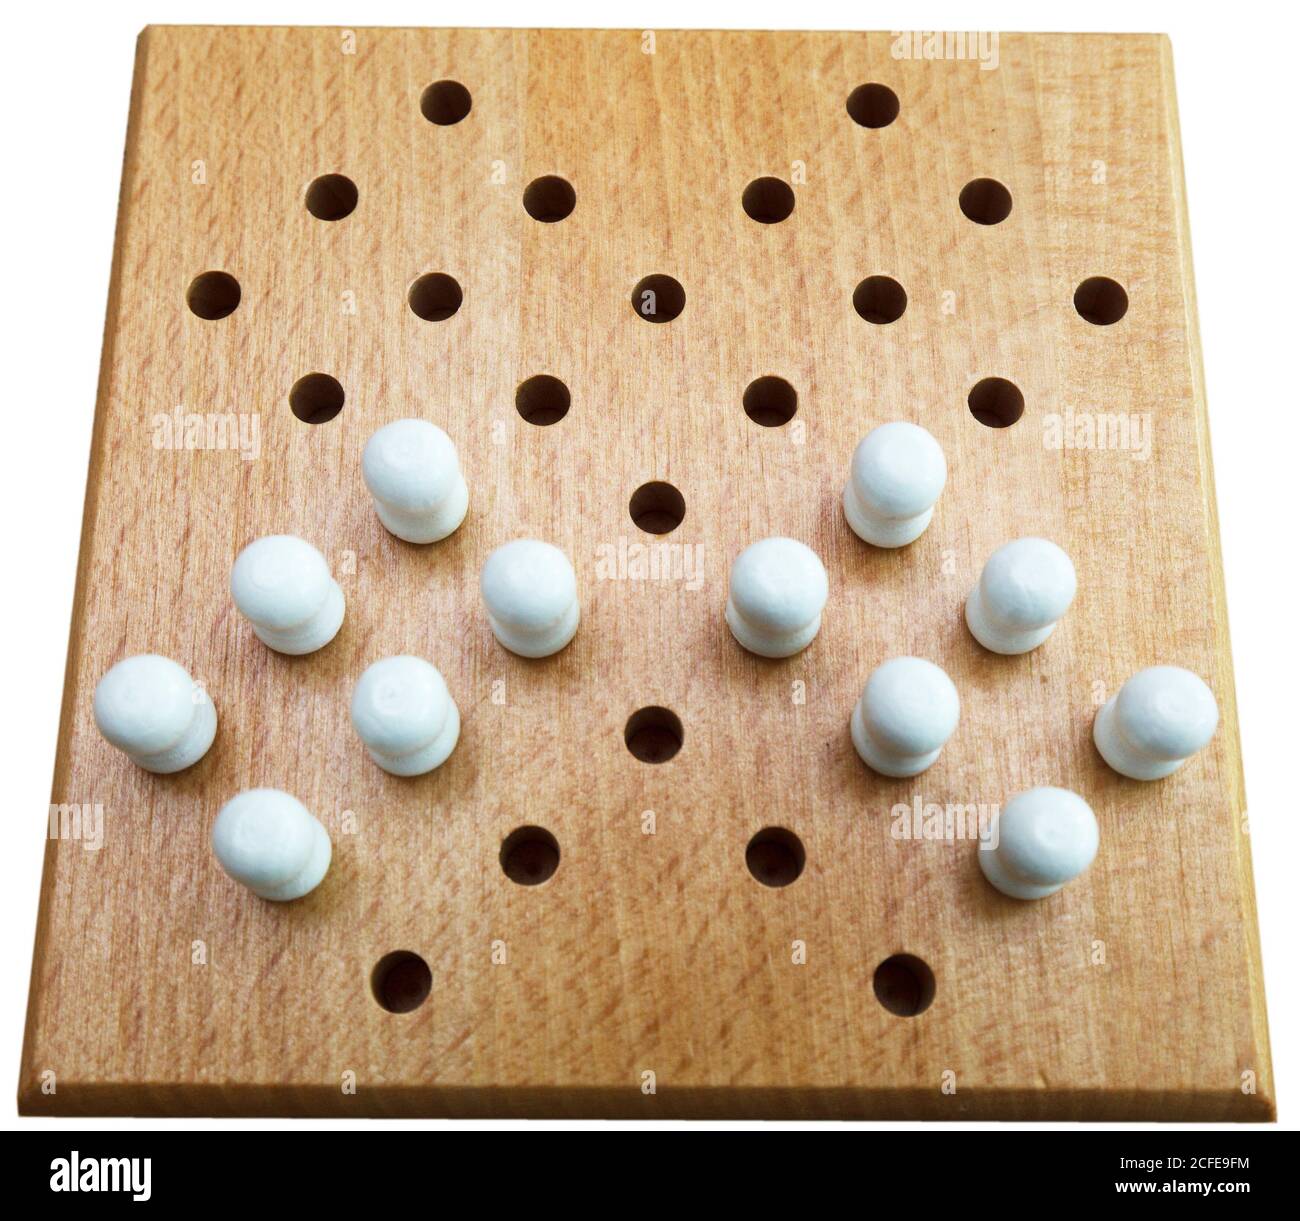 Solitaire game board with figures Stock Photo